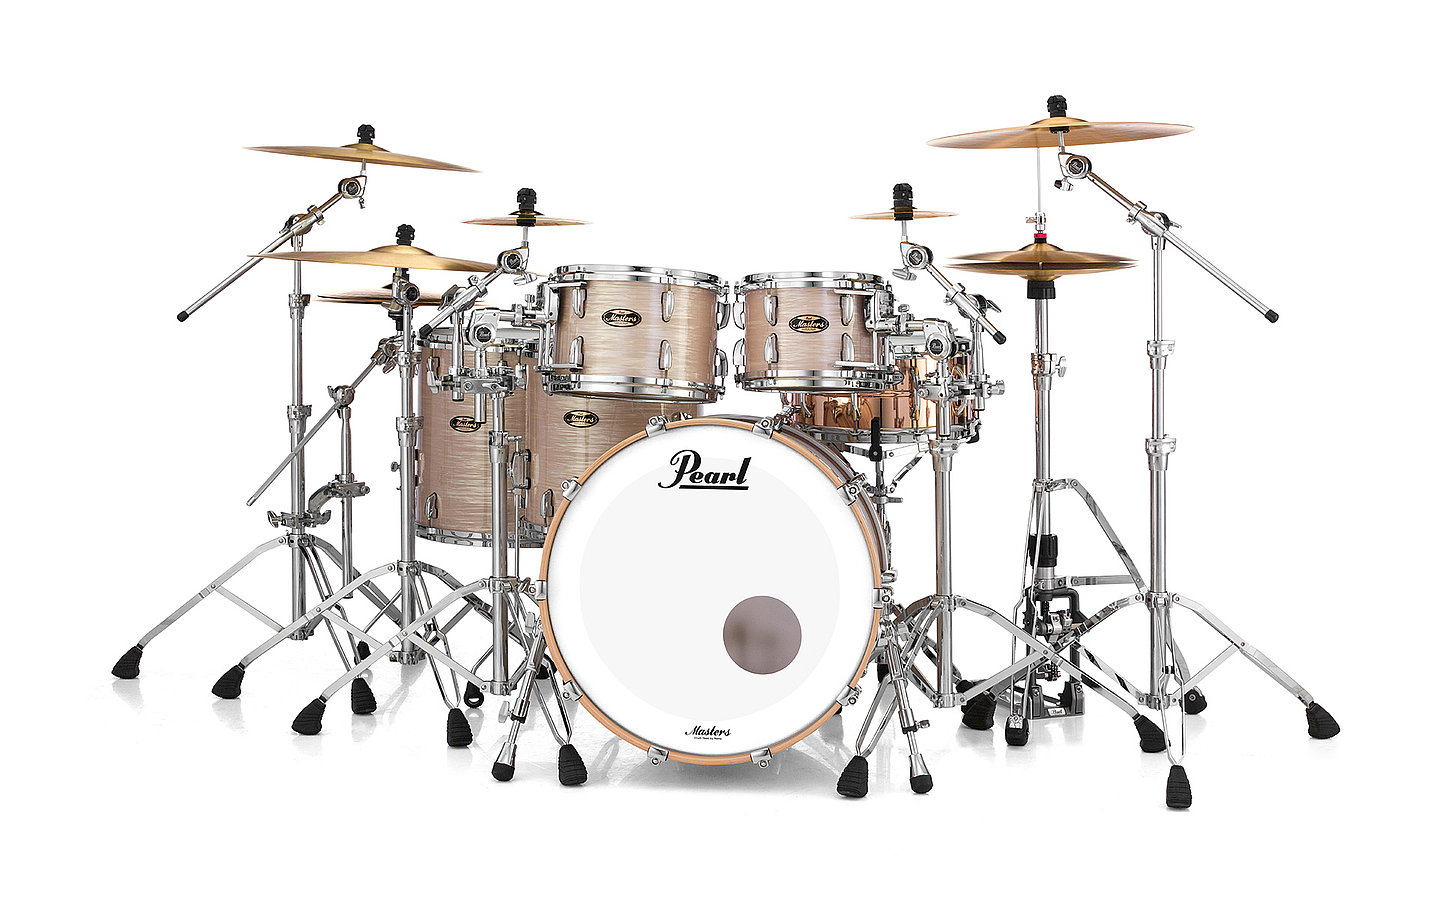 PEARL PUTS SOUND AT THE FOREFRONT WITH NEW MASTERS MAPLE/GUM SERIES DRUMS